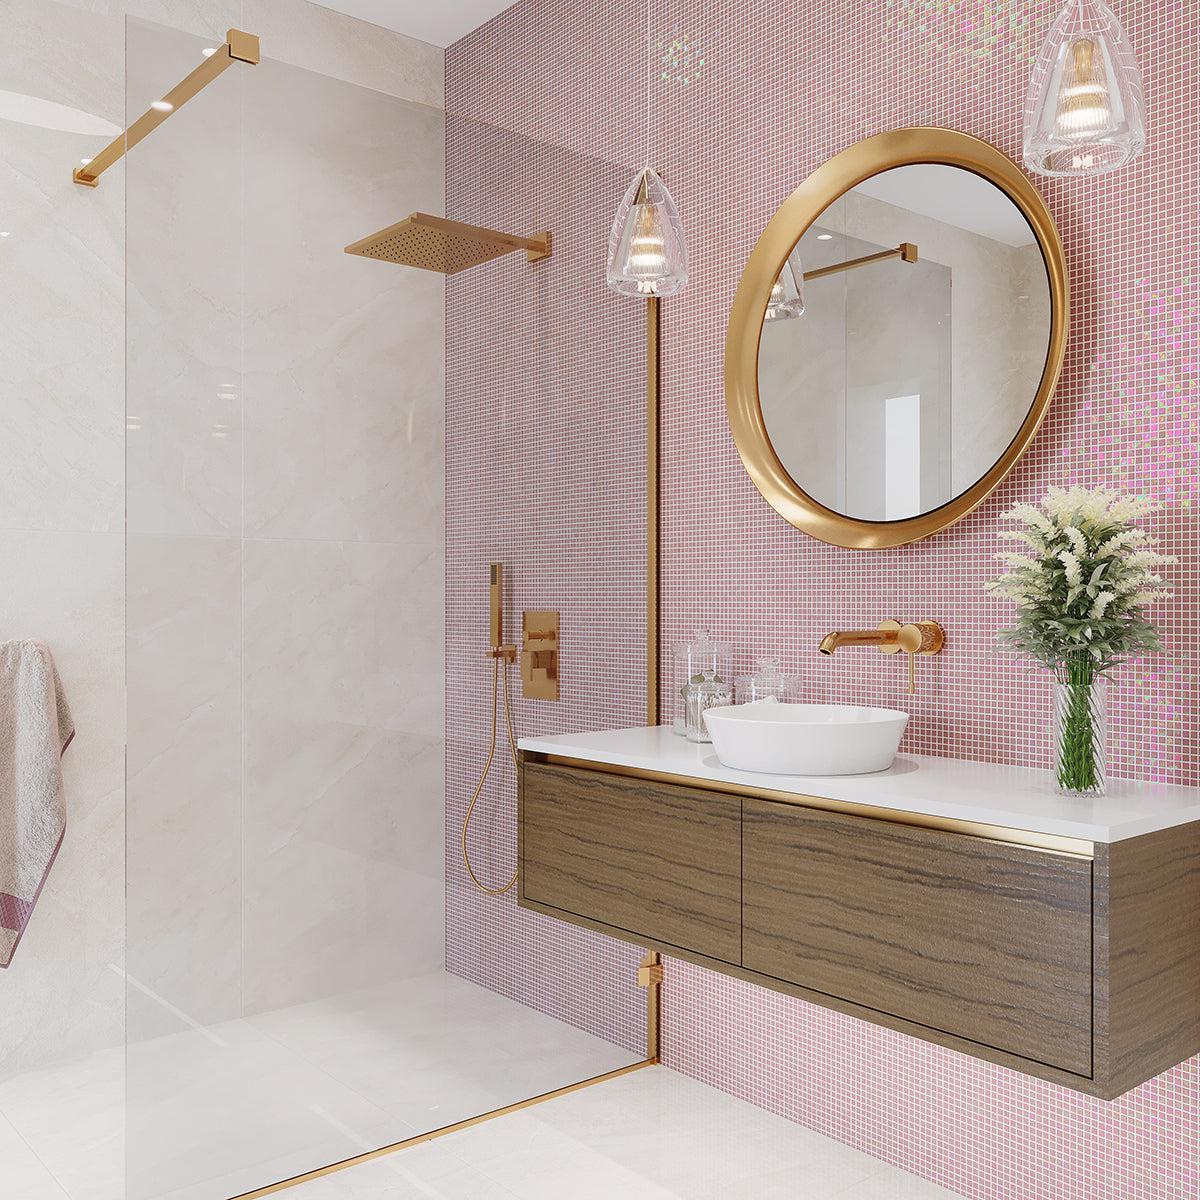 Modern Bathroom Design with Brass Fixtures and Pearly Peach Glossy Squares Glass Tile Backsplash